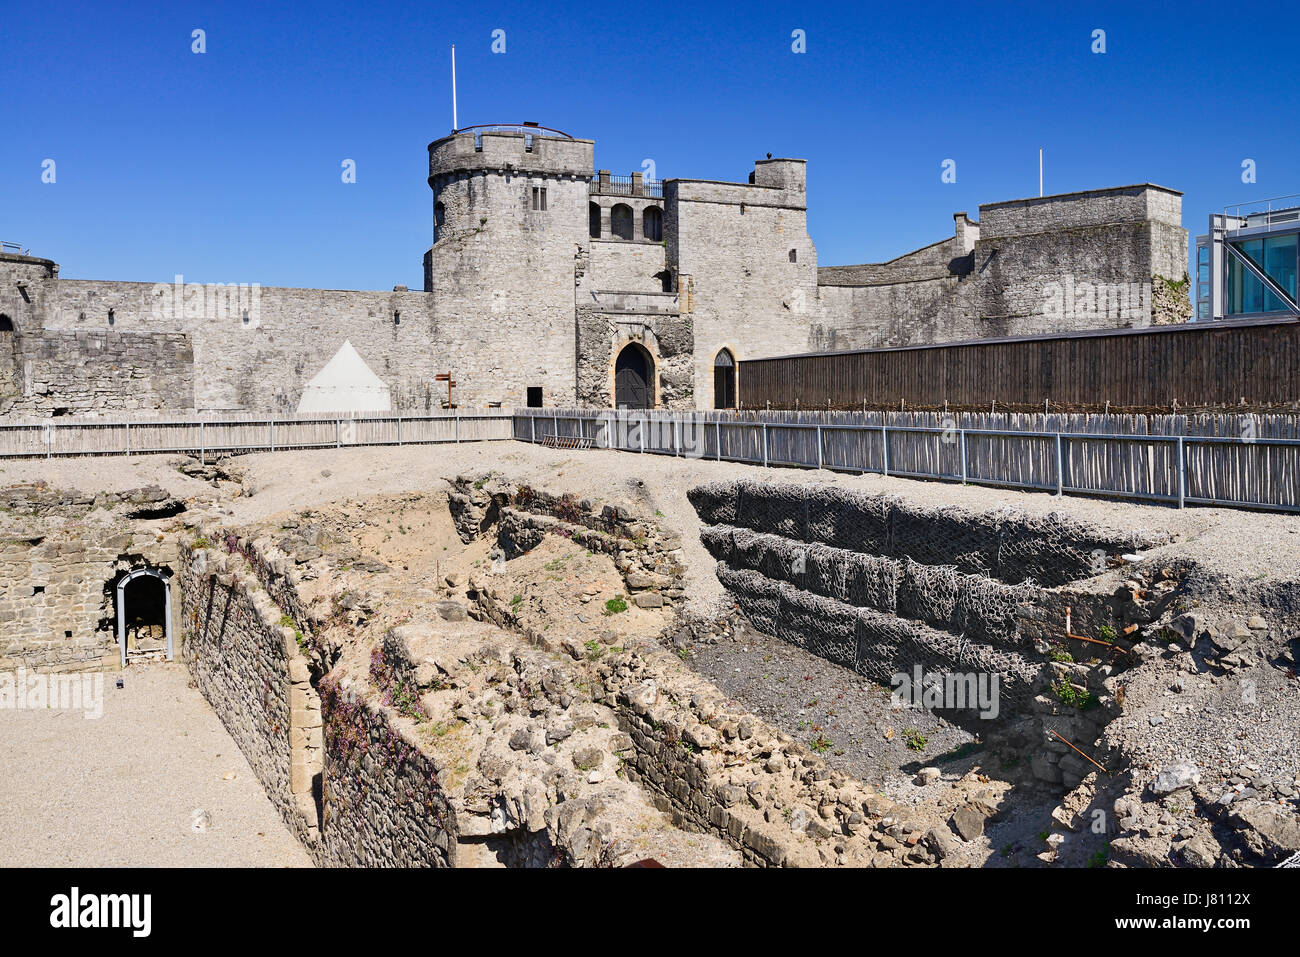 Ireland, County Limerick, Limerick City, St Johns Castle the Courtyard including excavation area of the Great Hall. Stock Photo